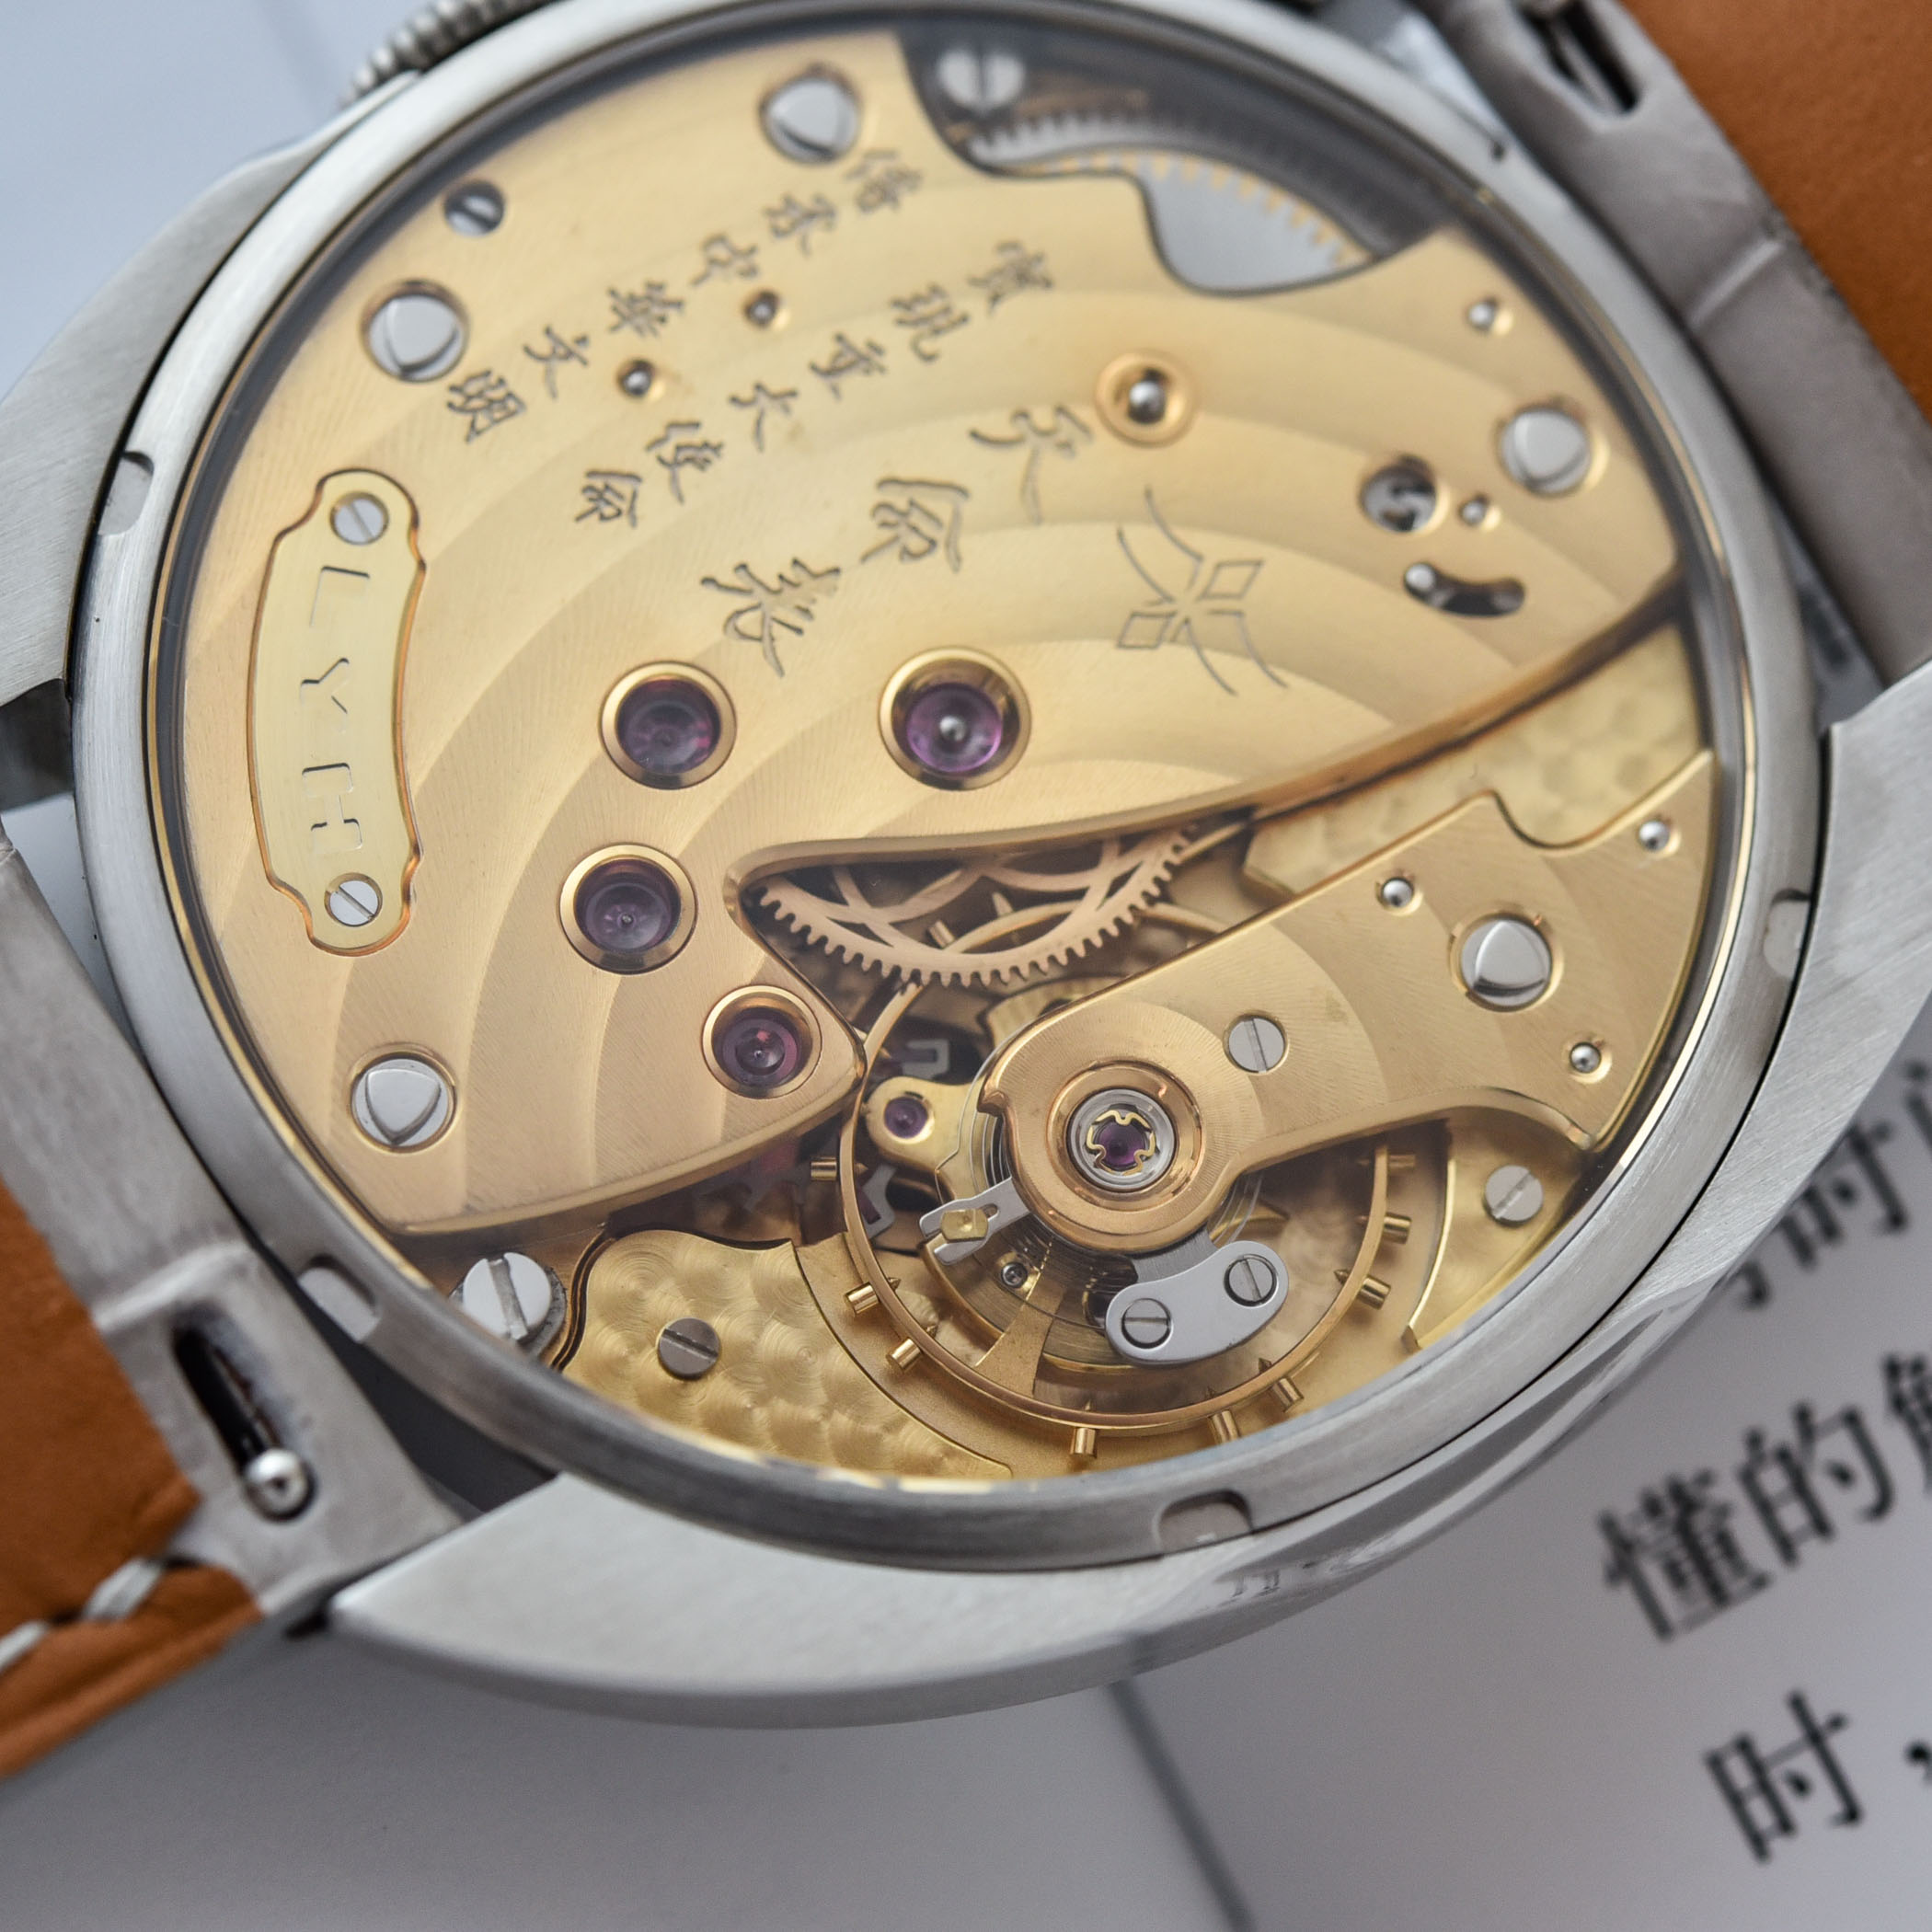 Rising Star of Chinese Horology - Introducing Celadon HH